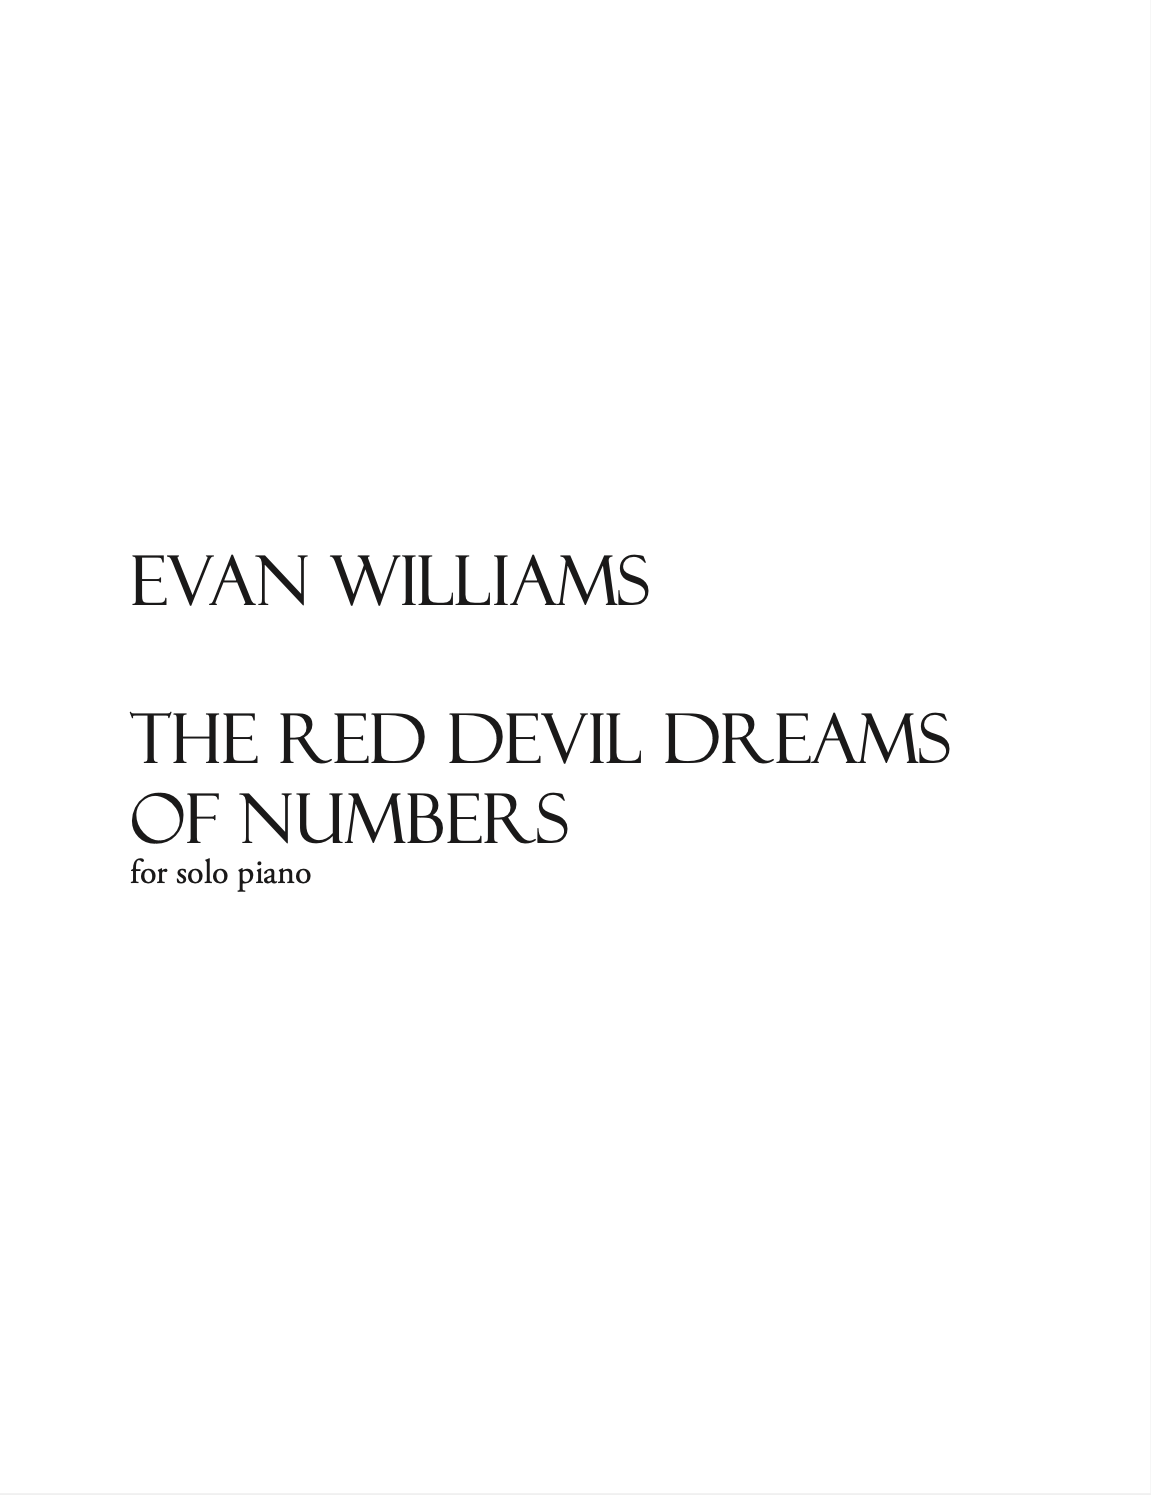 The Red Devil Dreams Of Numbers by Evan Williams